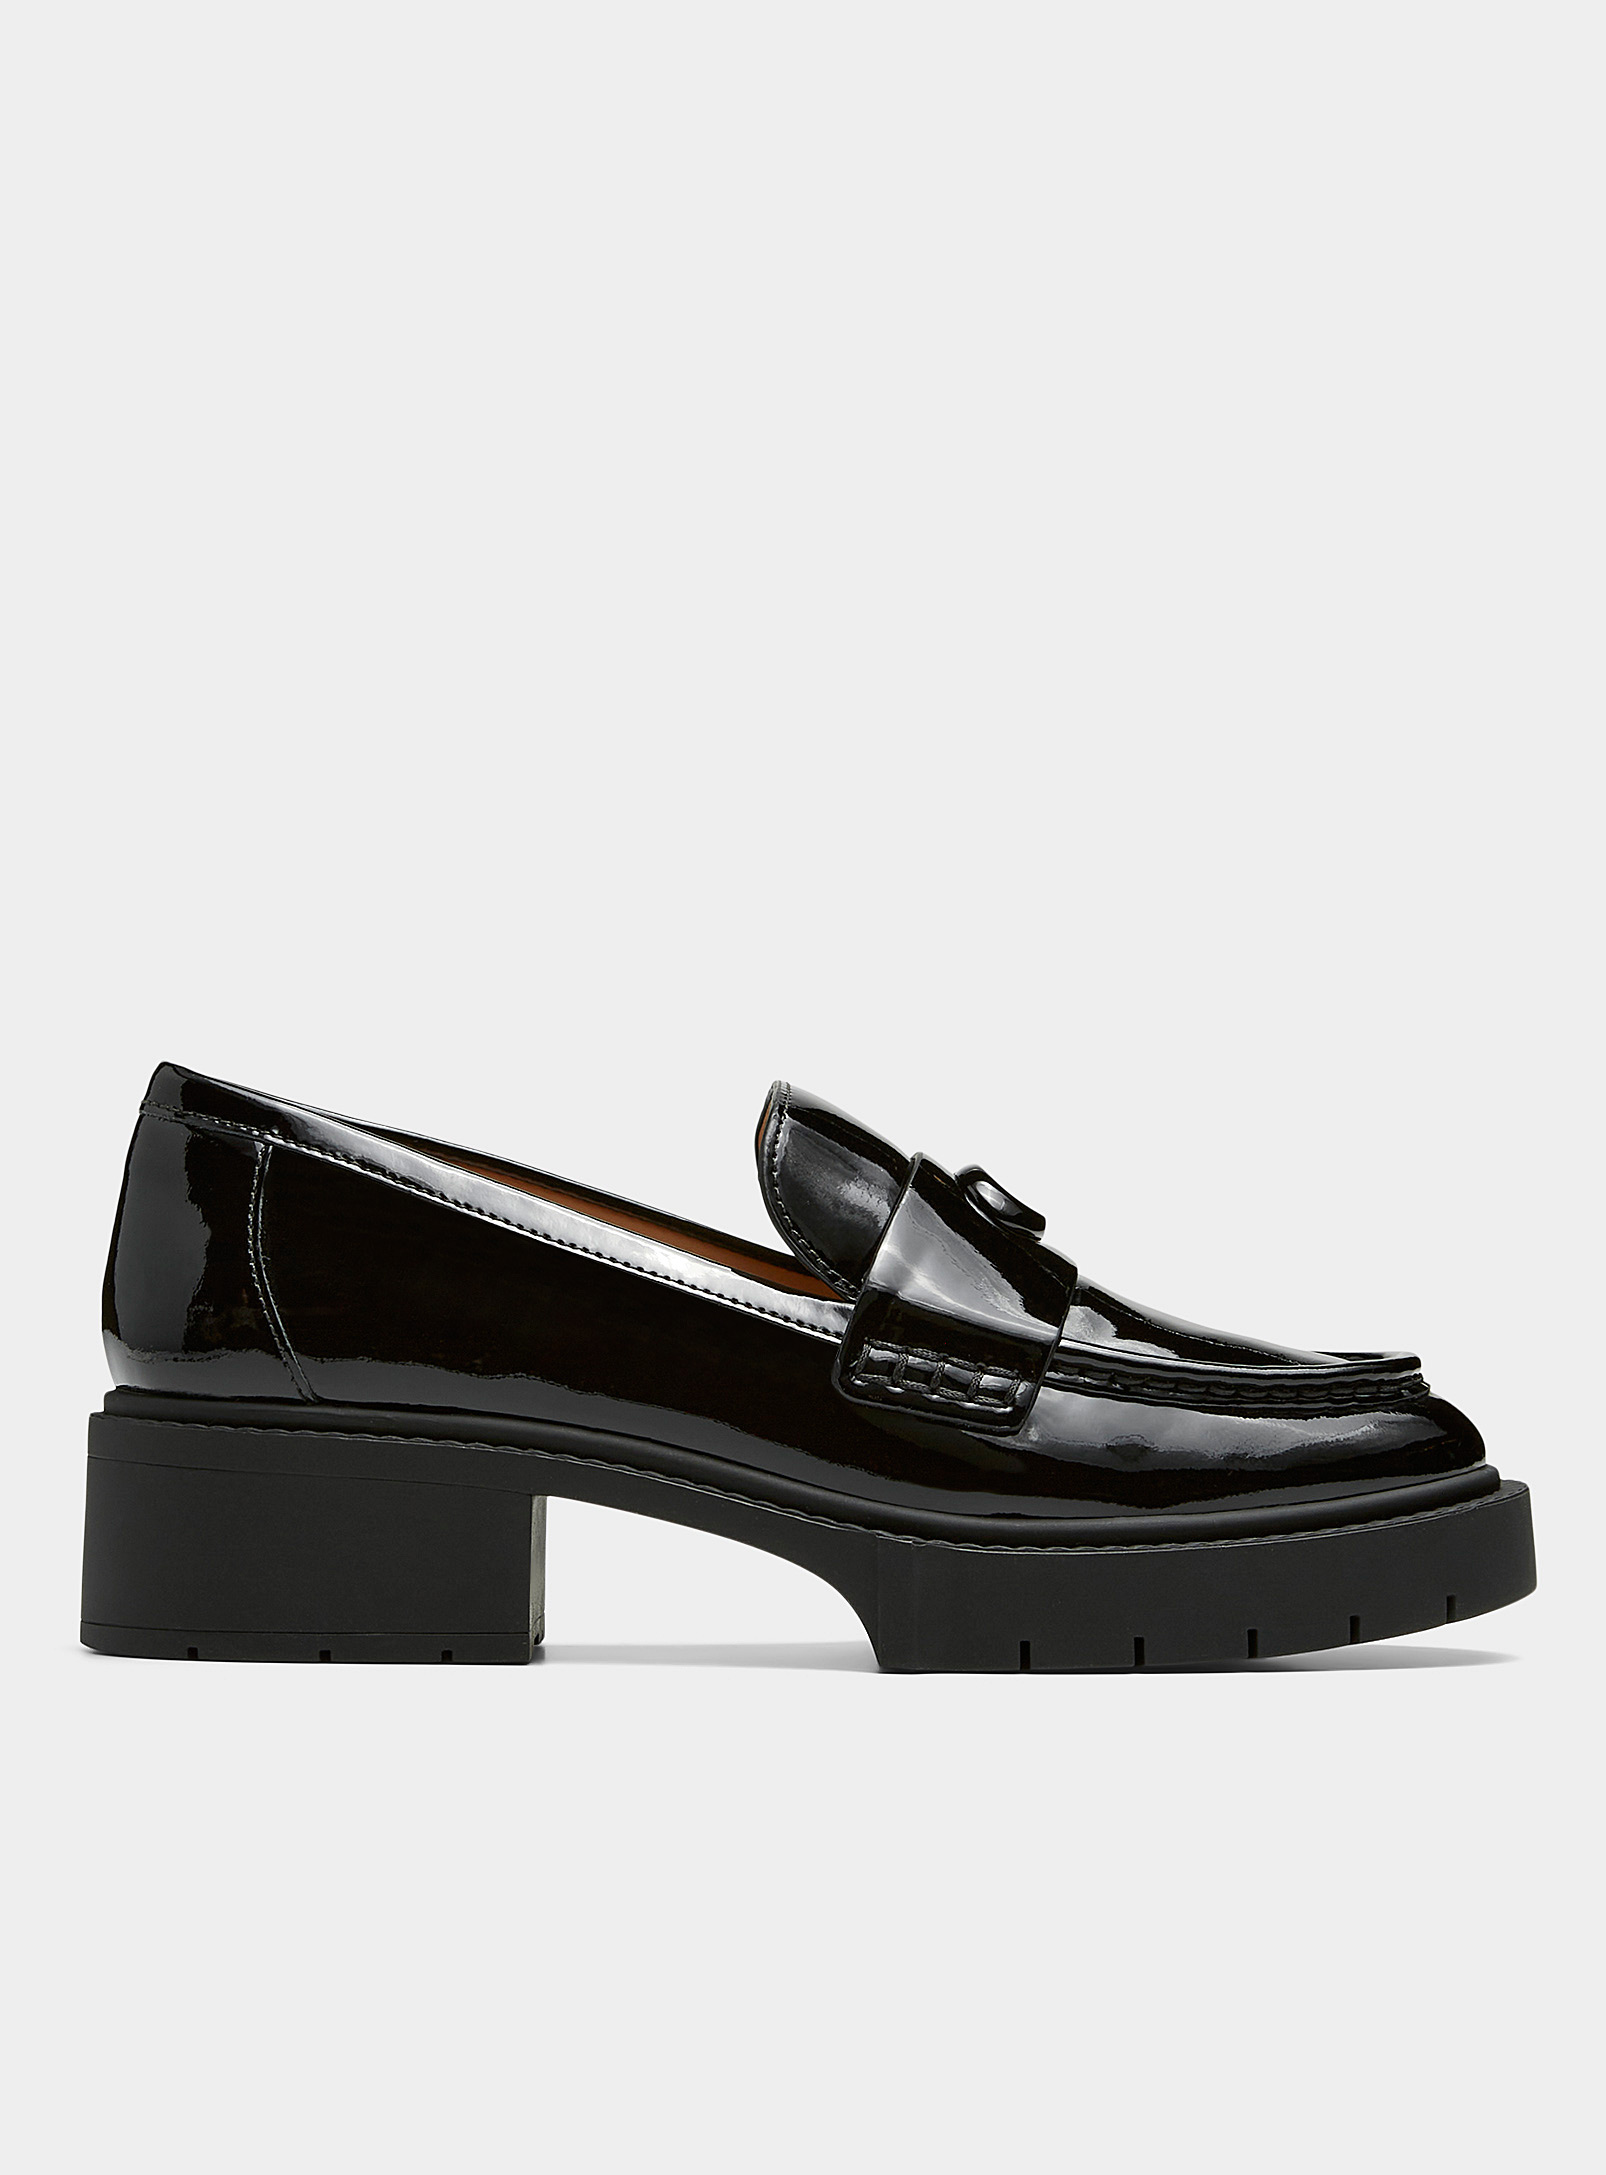 COACH LEAH PATENT LEATHER LOAFERS WOMEN